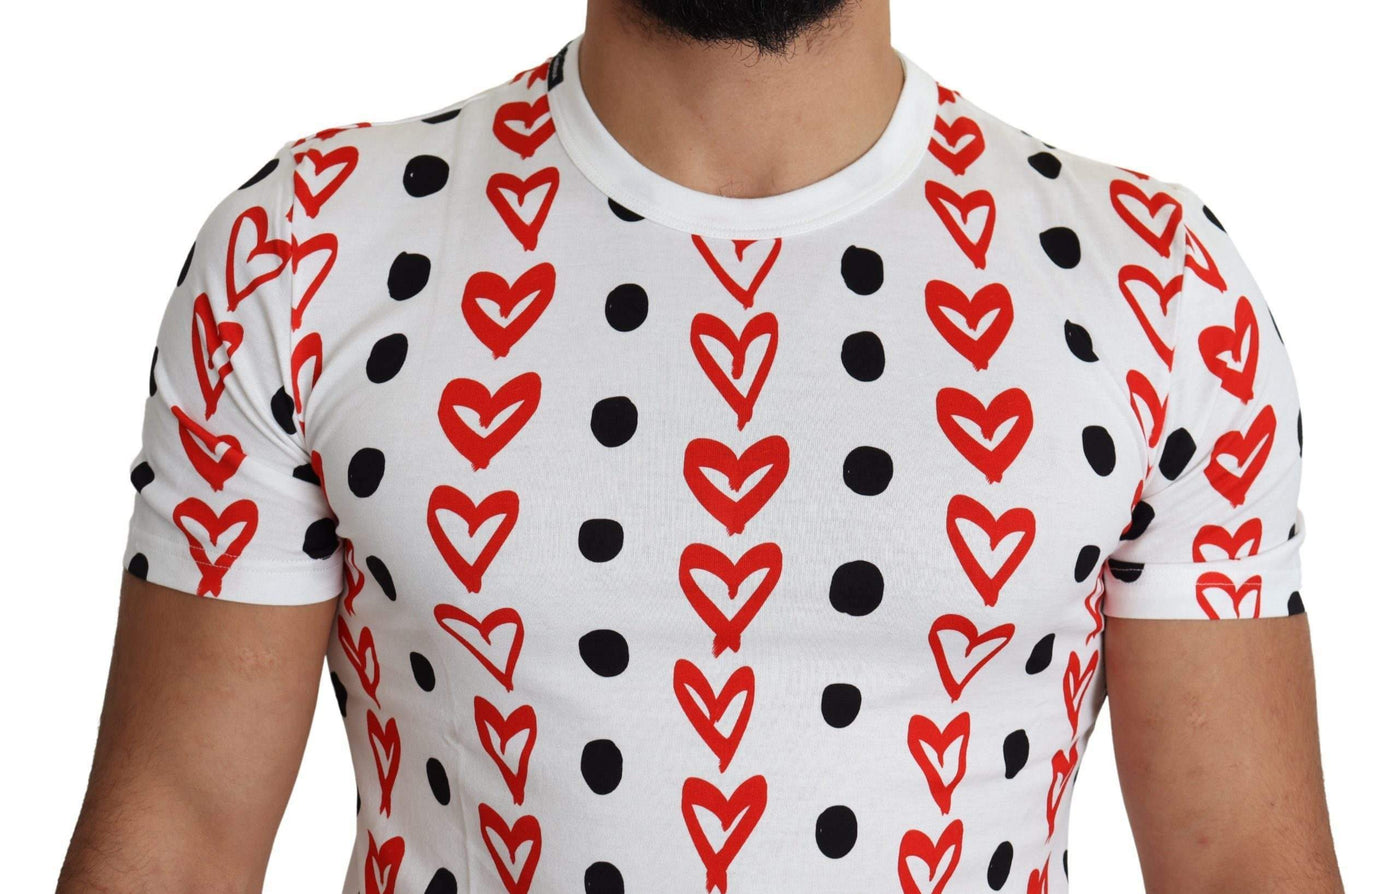 Dolce & Gabbana White Hearts Print  Cotton Men Top T-shirt #men, Brand_Dolce & Gabbana, Dolce & Gabbana, feed-agegroup-adult, feed-color-white, feed-gender-male, feed-size-IT44 | XS, feed-size-IT46 | S, feed-size-IT50 | L, feed-size-IT54 | XL, Gender_Men, IT44 | XS, IT46 | S, IT48 | M, IT50 | L, IT54 | XL, Men - New Arrivals, T-shirts - Men - Clothing, White at SEYMAYKA